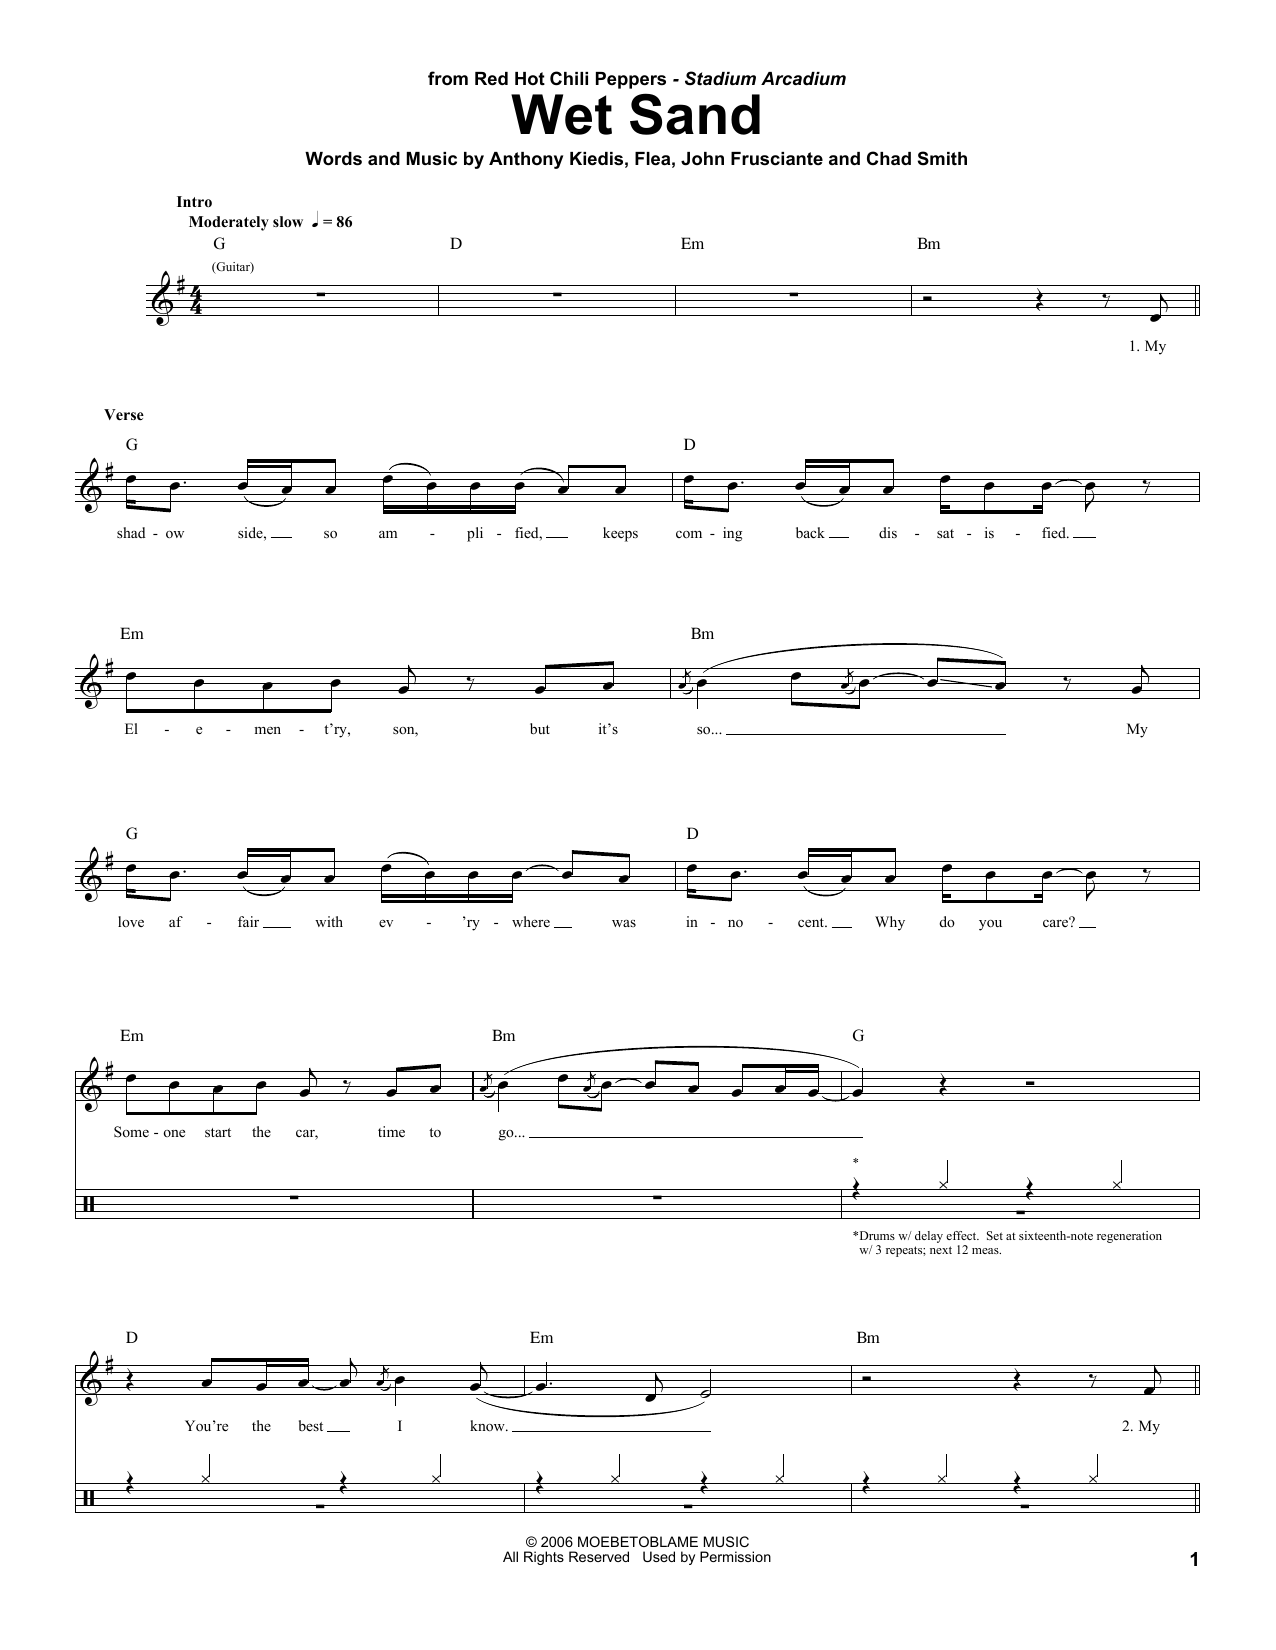 Download Red Hot Chili Peppers Wet Sand Sheet Music